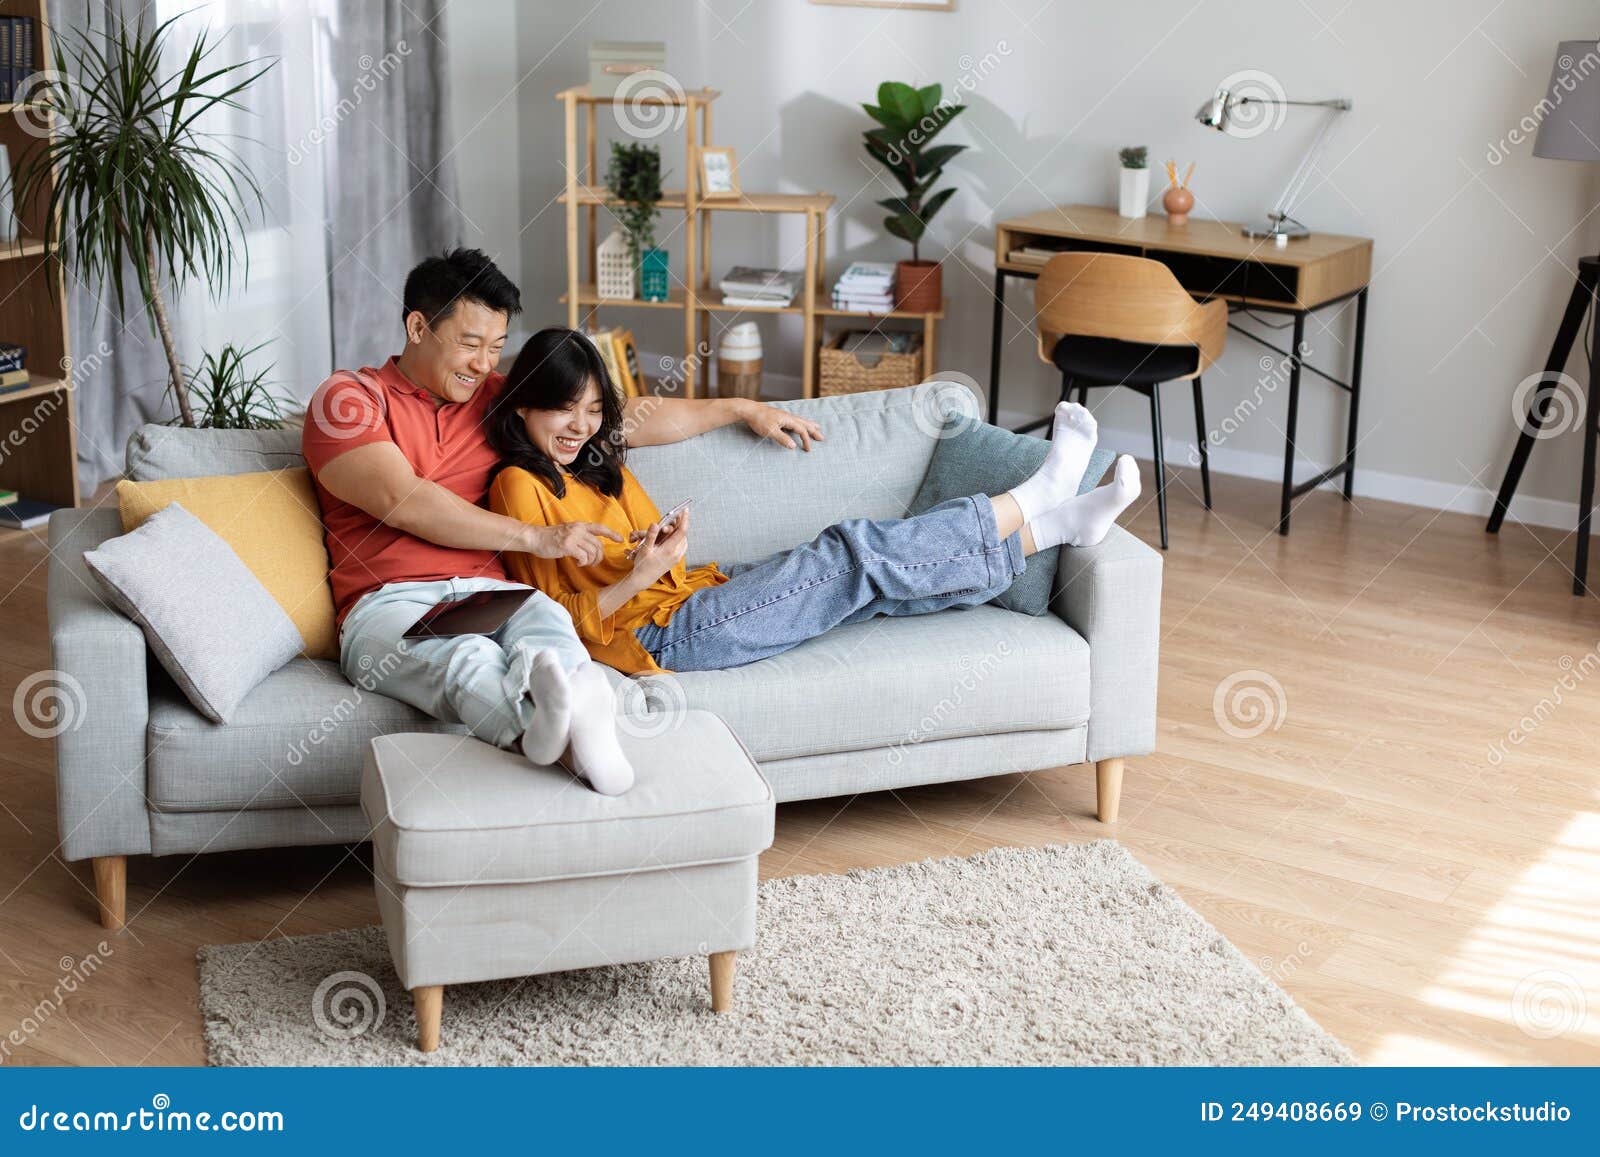 https://thumbs.dreamstime.com/z/relaxed-japanese-couple-chilling-together-home-using-gadgets-relaxed-japanese-couple-chilling-together-weekend-home-249408669.jpg